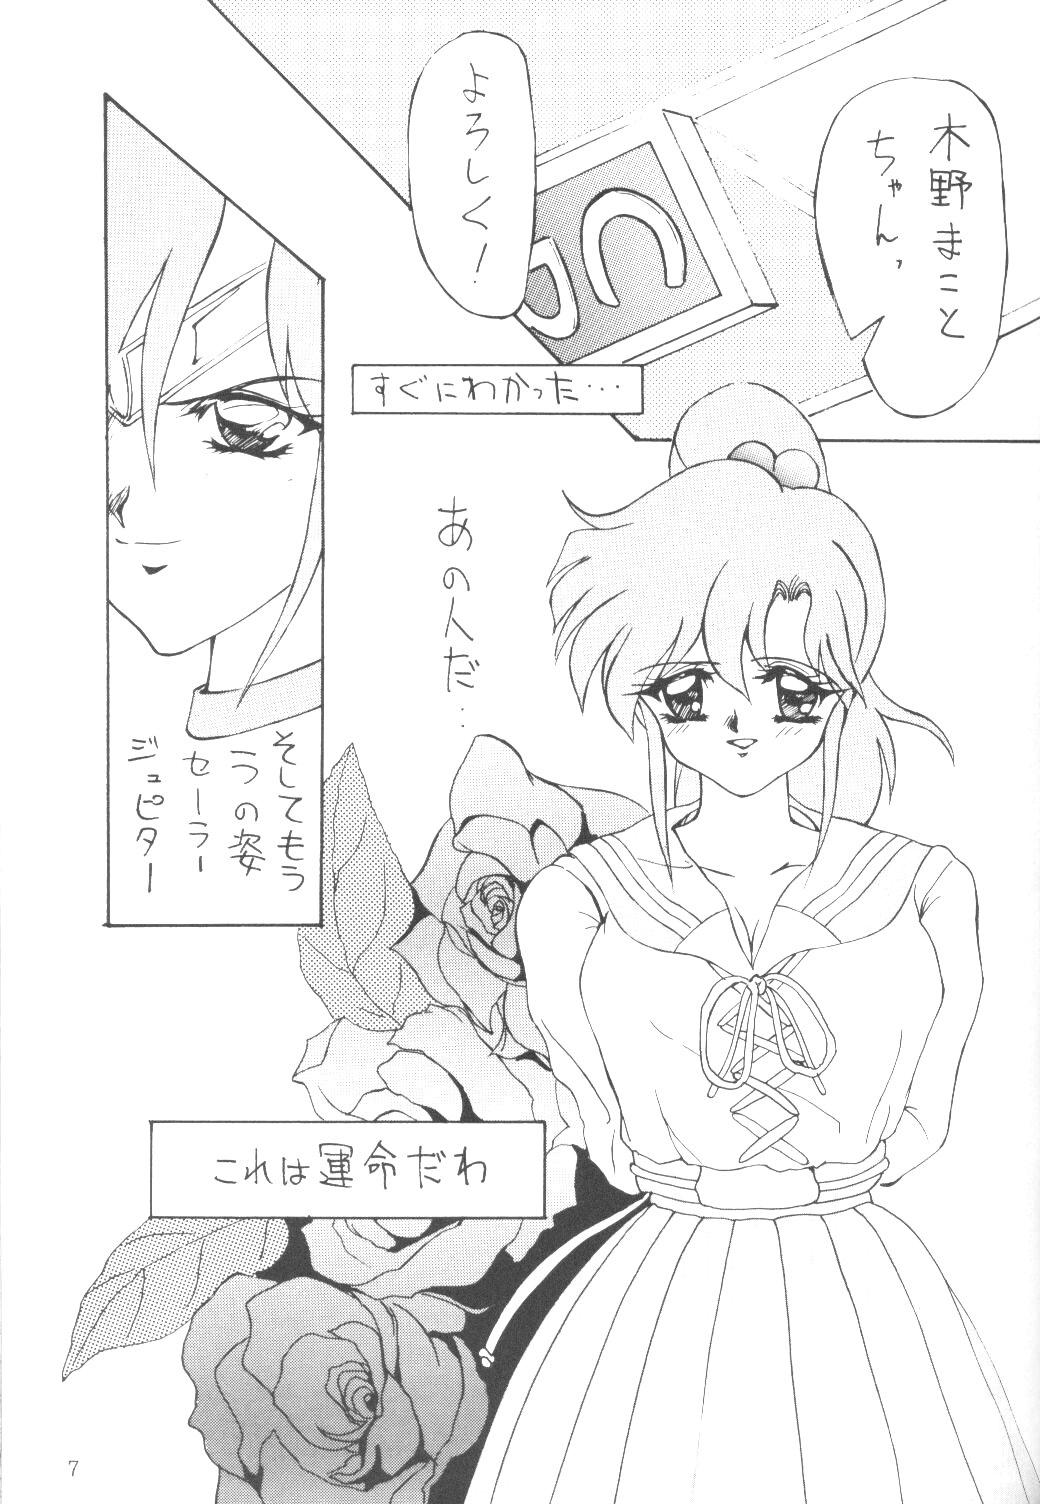 For ALIVE AMI LOST - Sailor moon Nude - Page 6